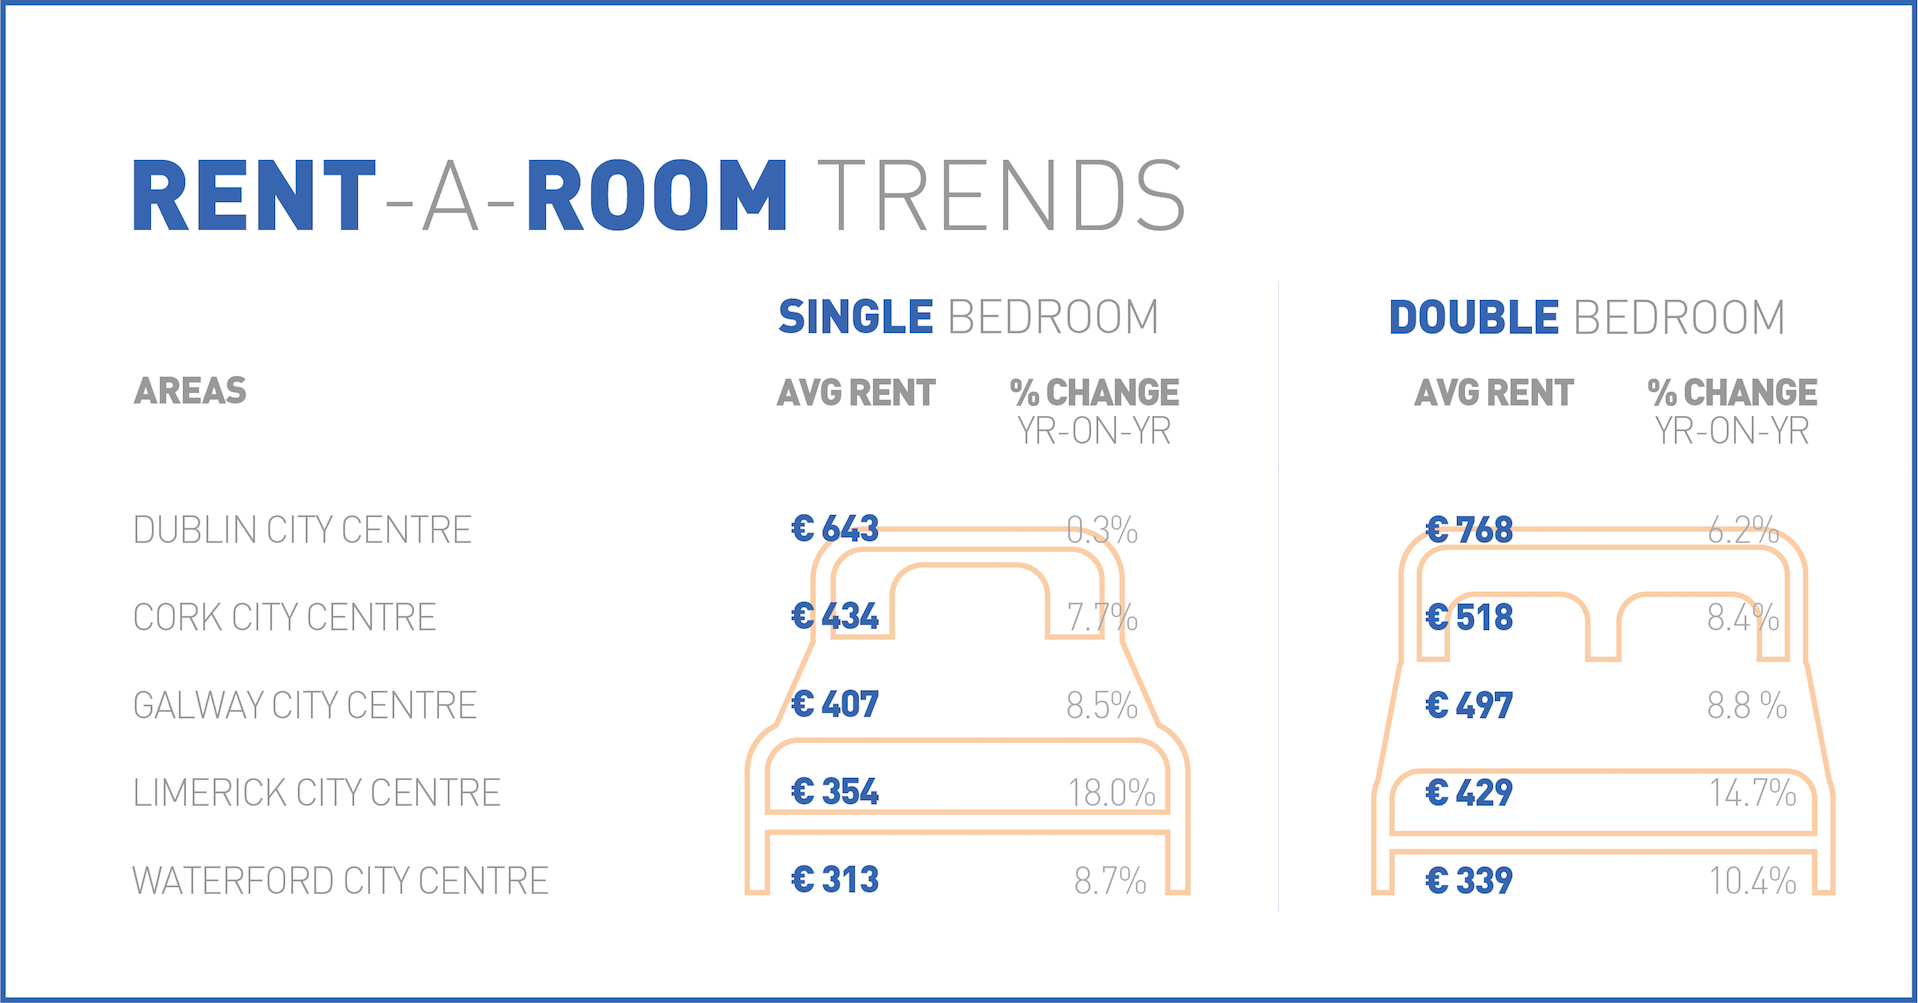 Rent a room trends - Year on year